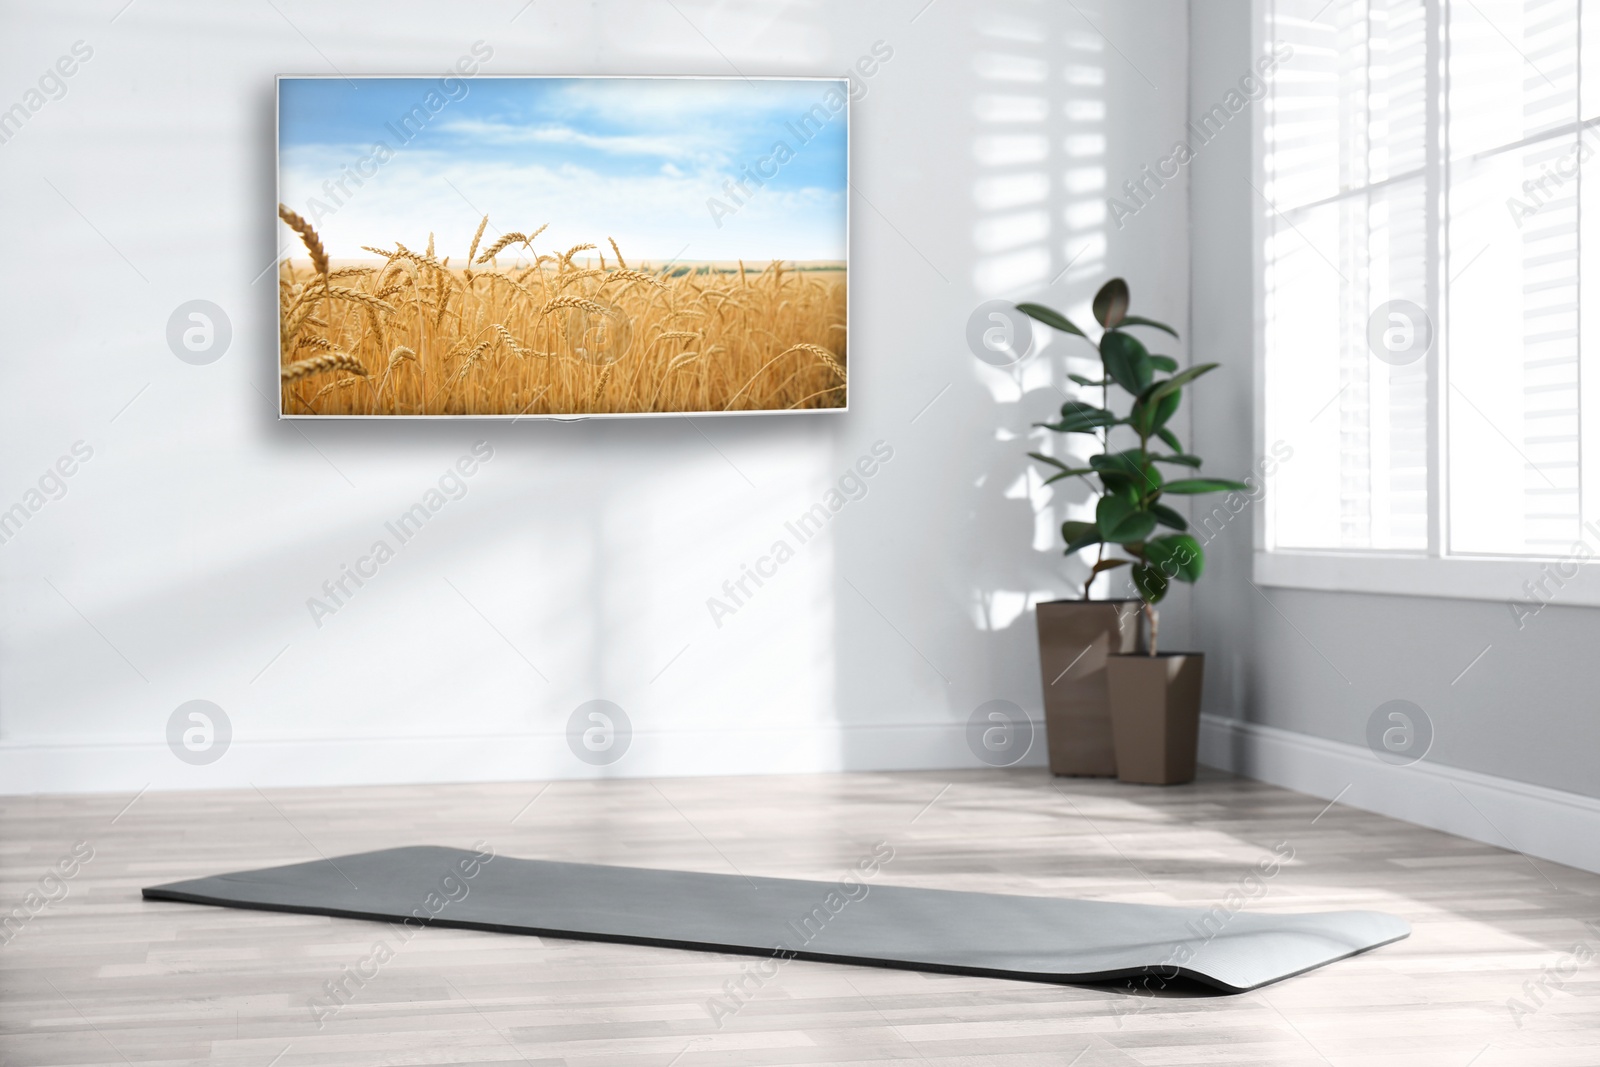 Image of Modern wide screen TV on white wall in room with yoga mat